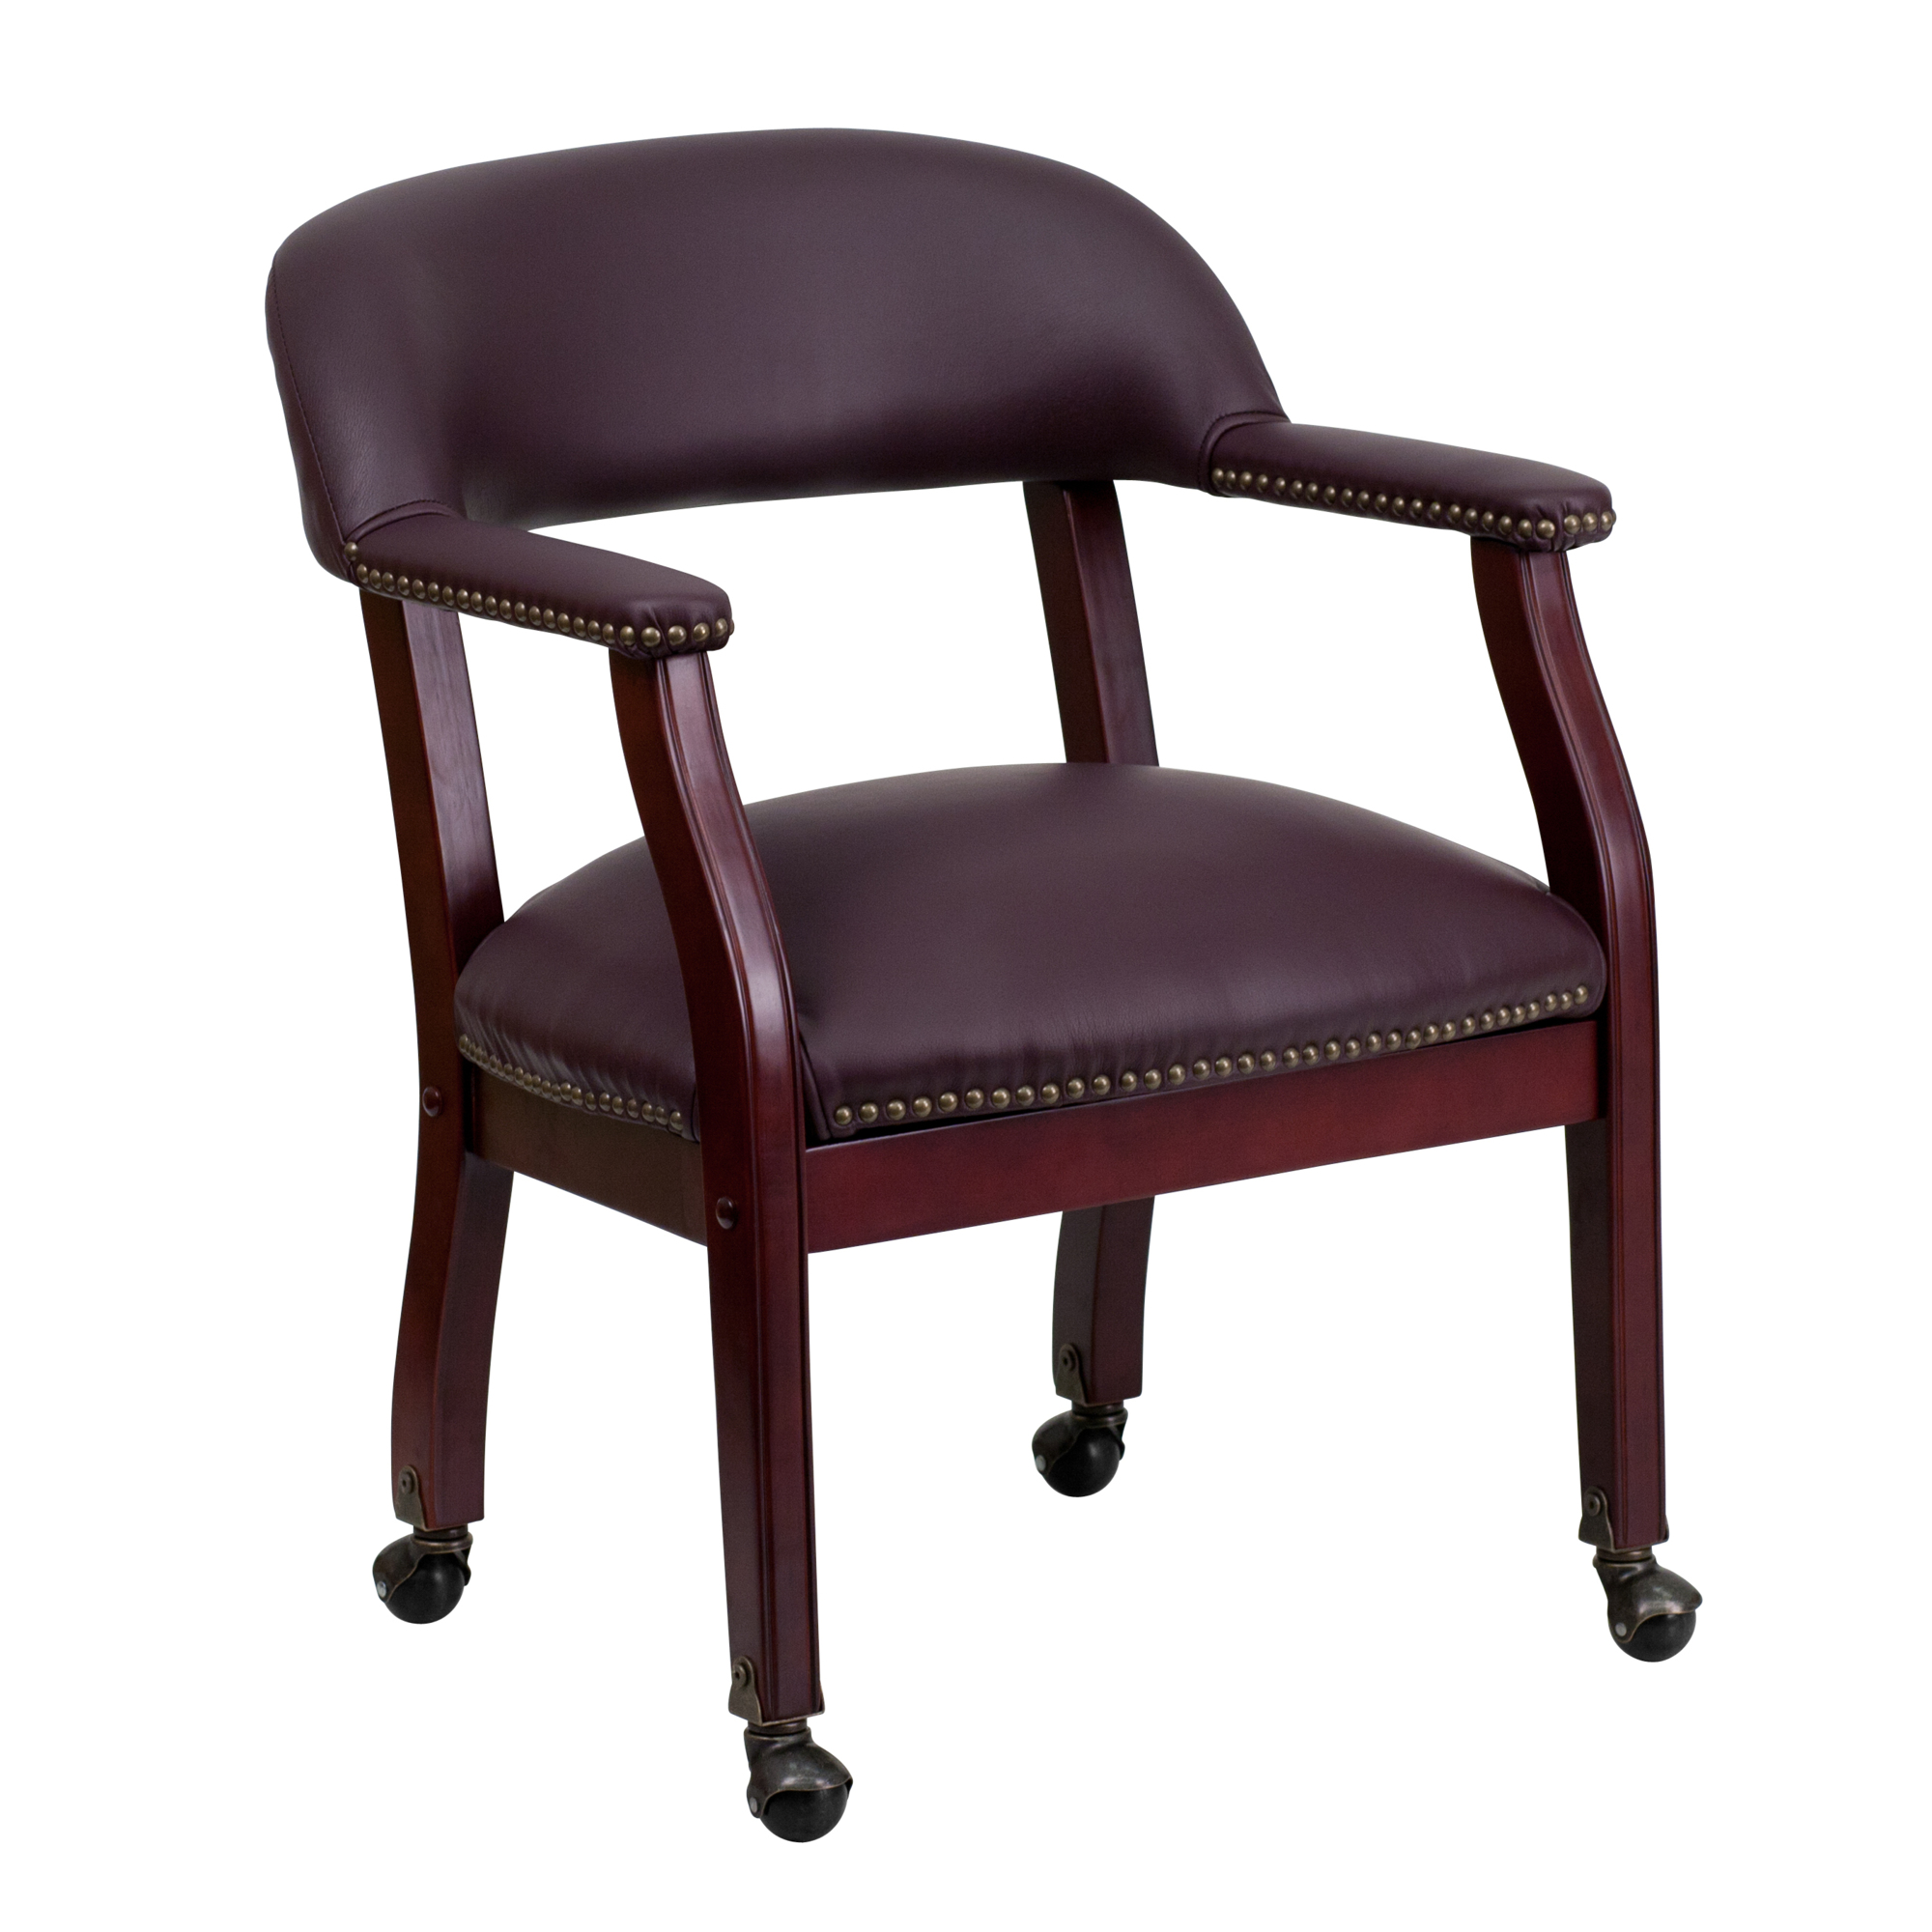 Flash Furniture, Burgundy LeatherSoft Conference Chair with Casters, Primary Color Burgundy, Included (qty.) 1, Model BZ100LF19LEA